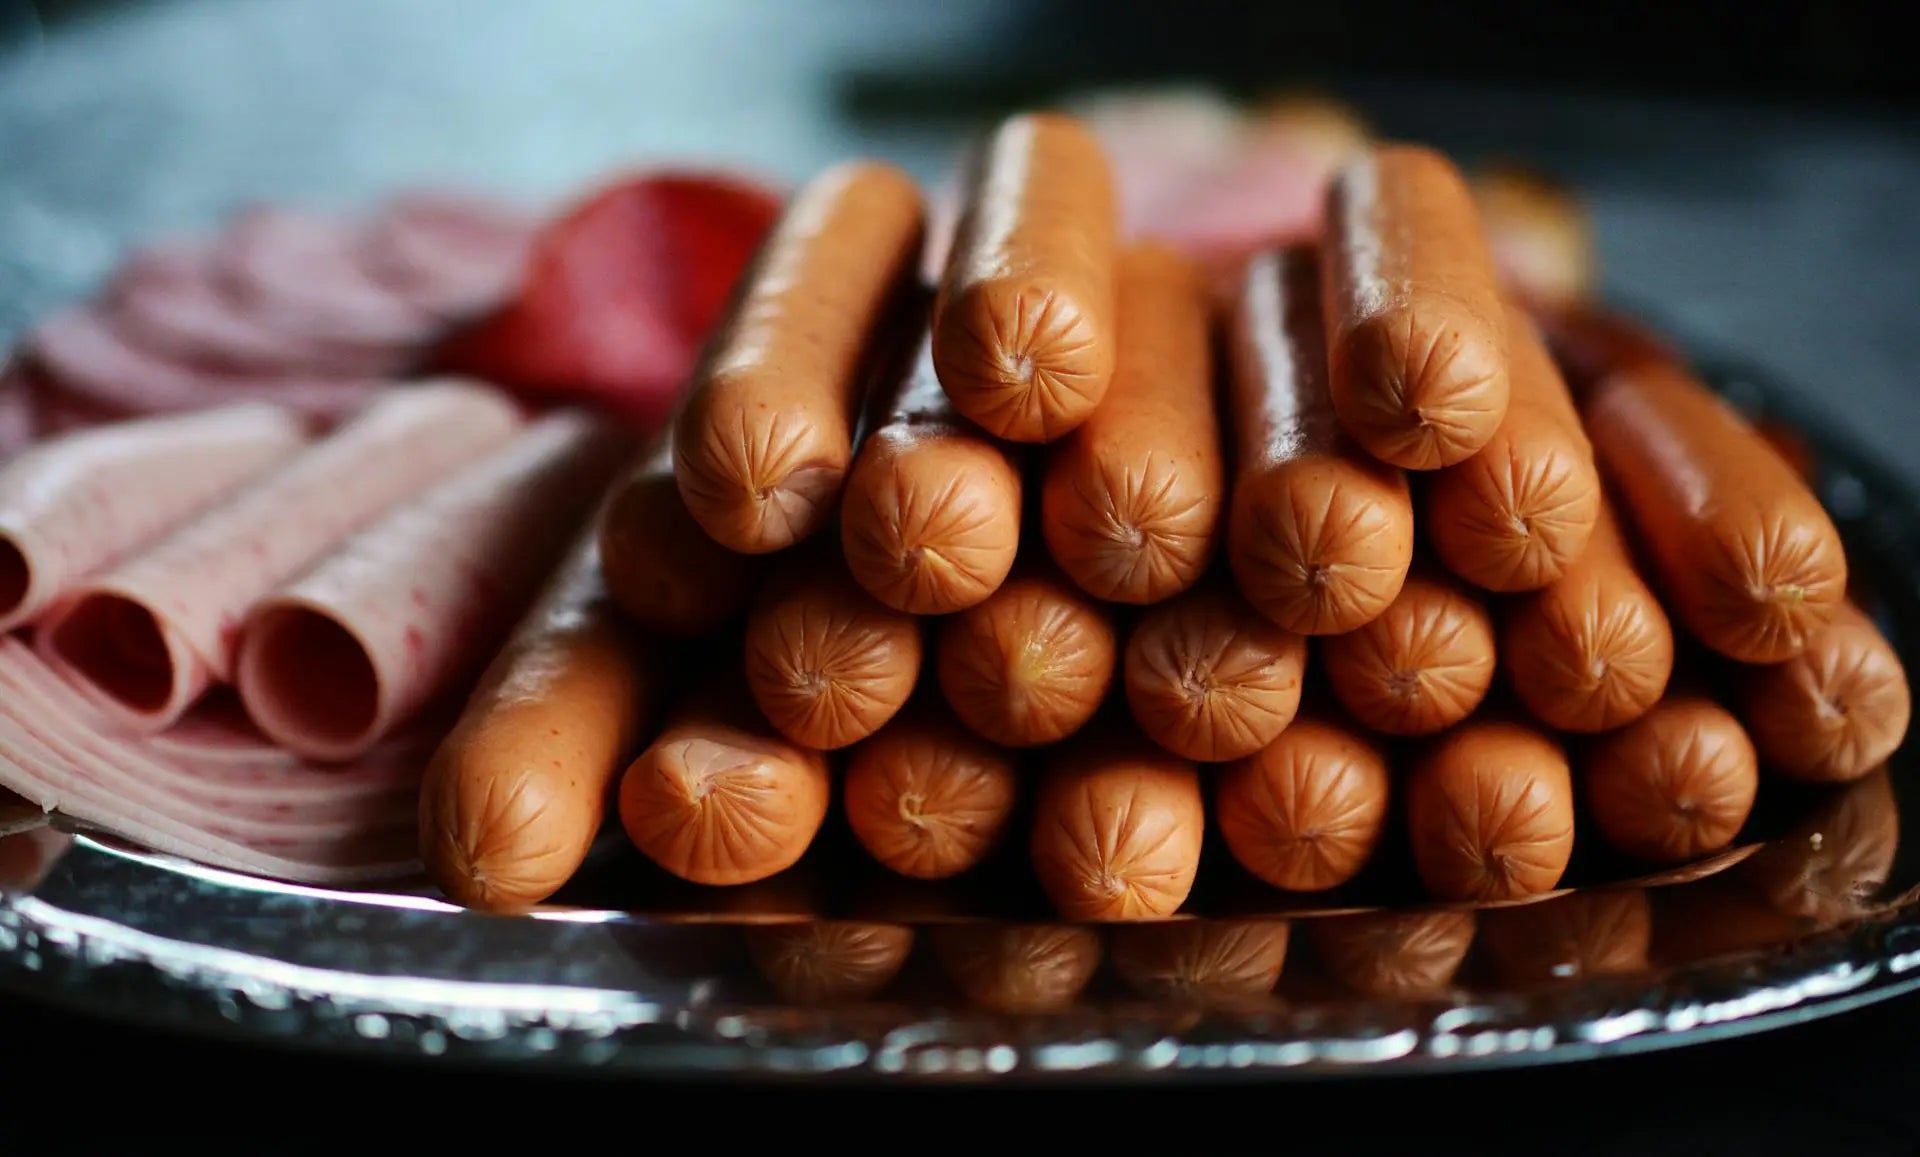 How-Long-Can-Vienna-Sausages-Last-In-The-Fridge | Fridge.com